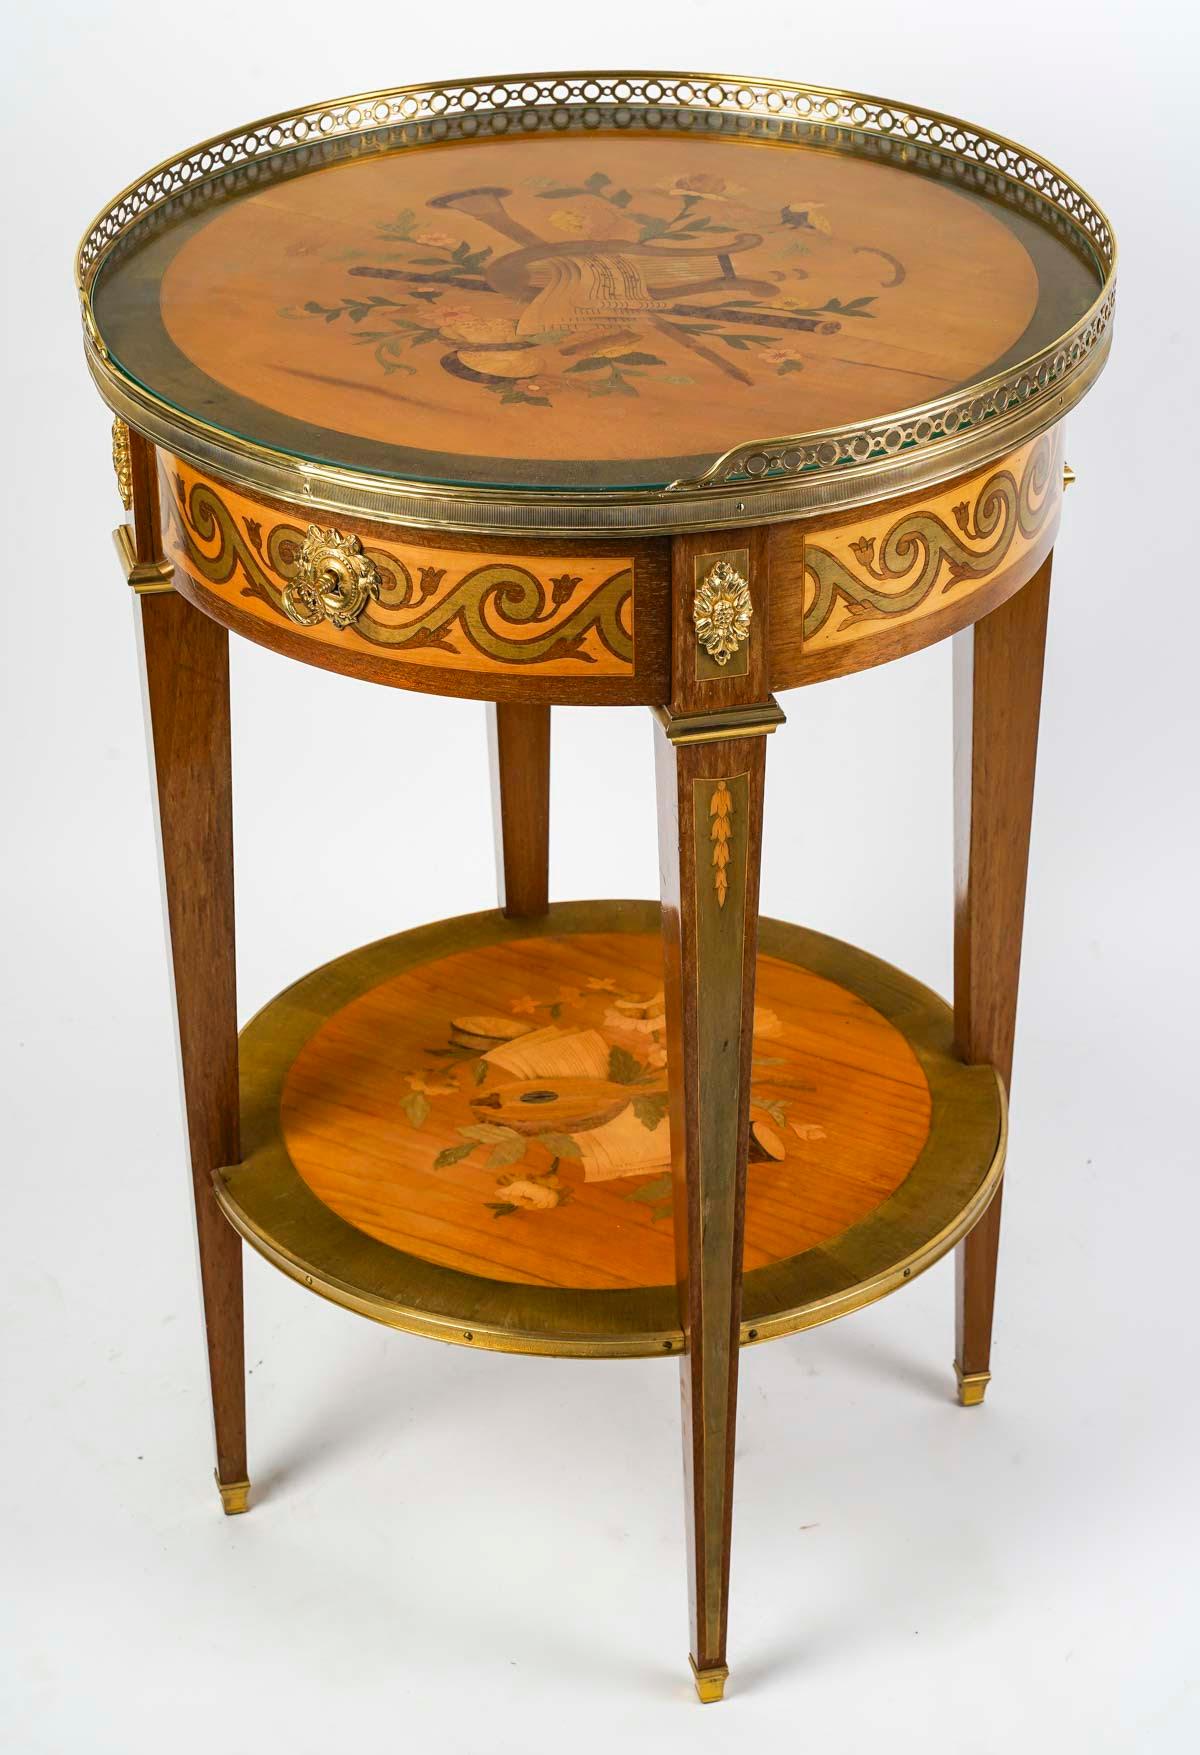 Louis XVI style pedestal table, 19th Century, Napoleon III period.

Veneered pedestal table, top covered with Louis XVI style glass, precious wood marquetry with music and bird decorations, gilt bronze mount, early 20th century.  
h: 75.5cm, d: 51cm